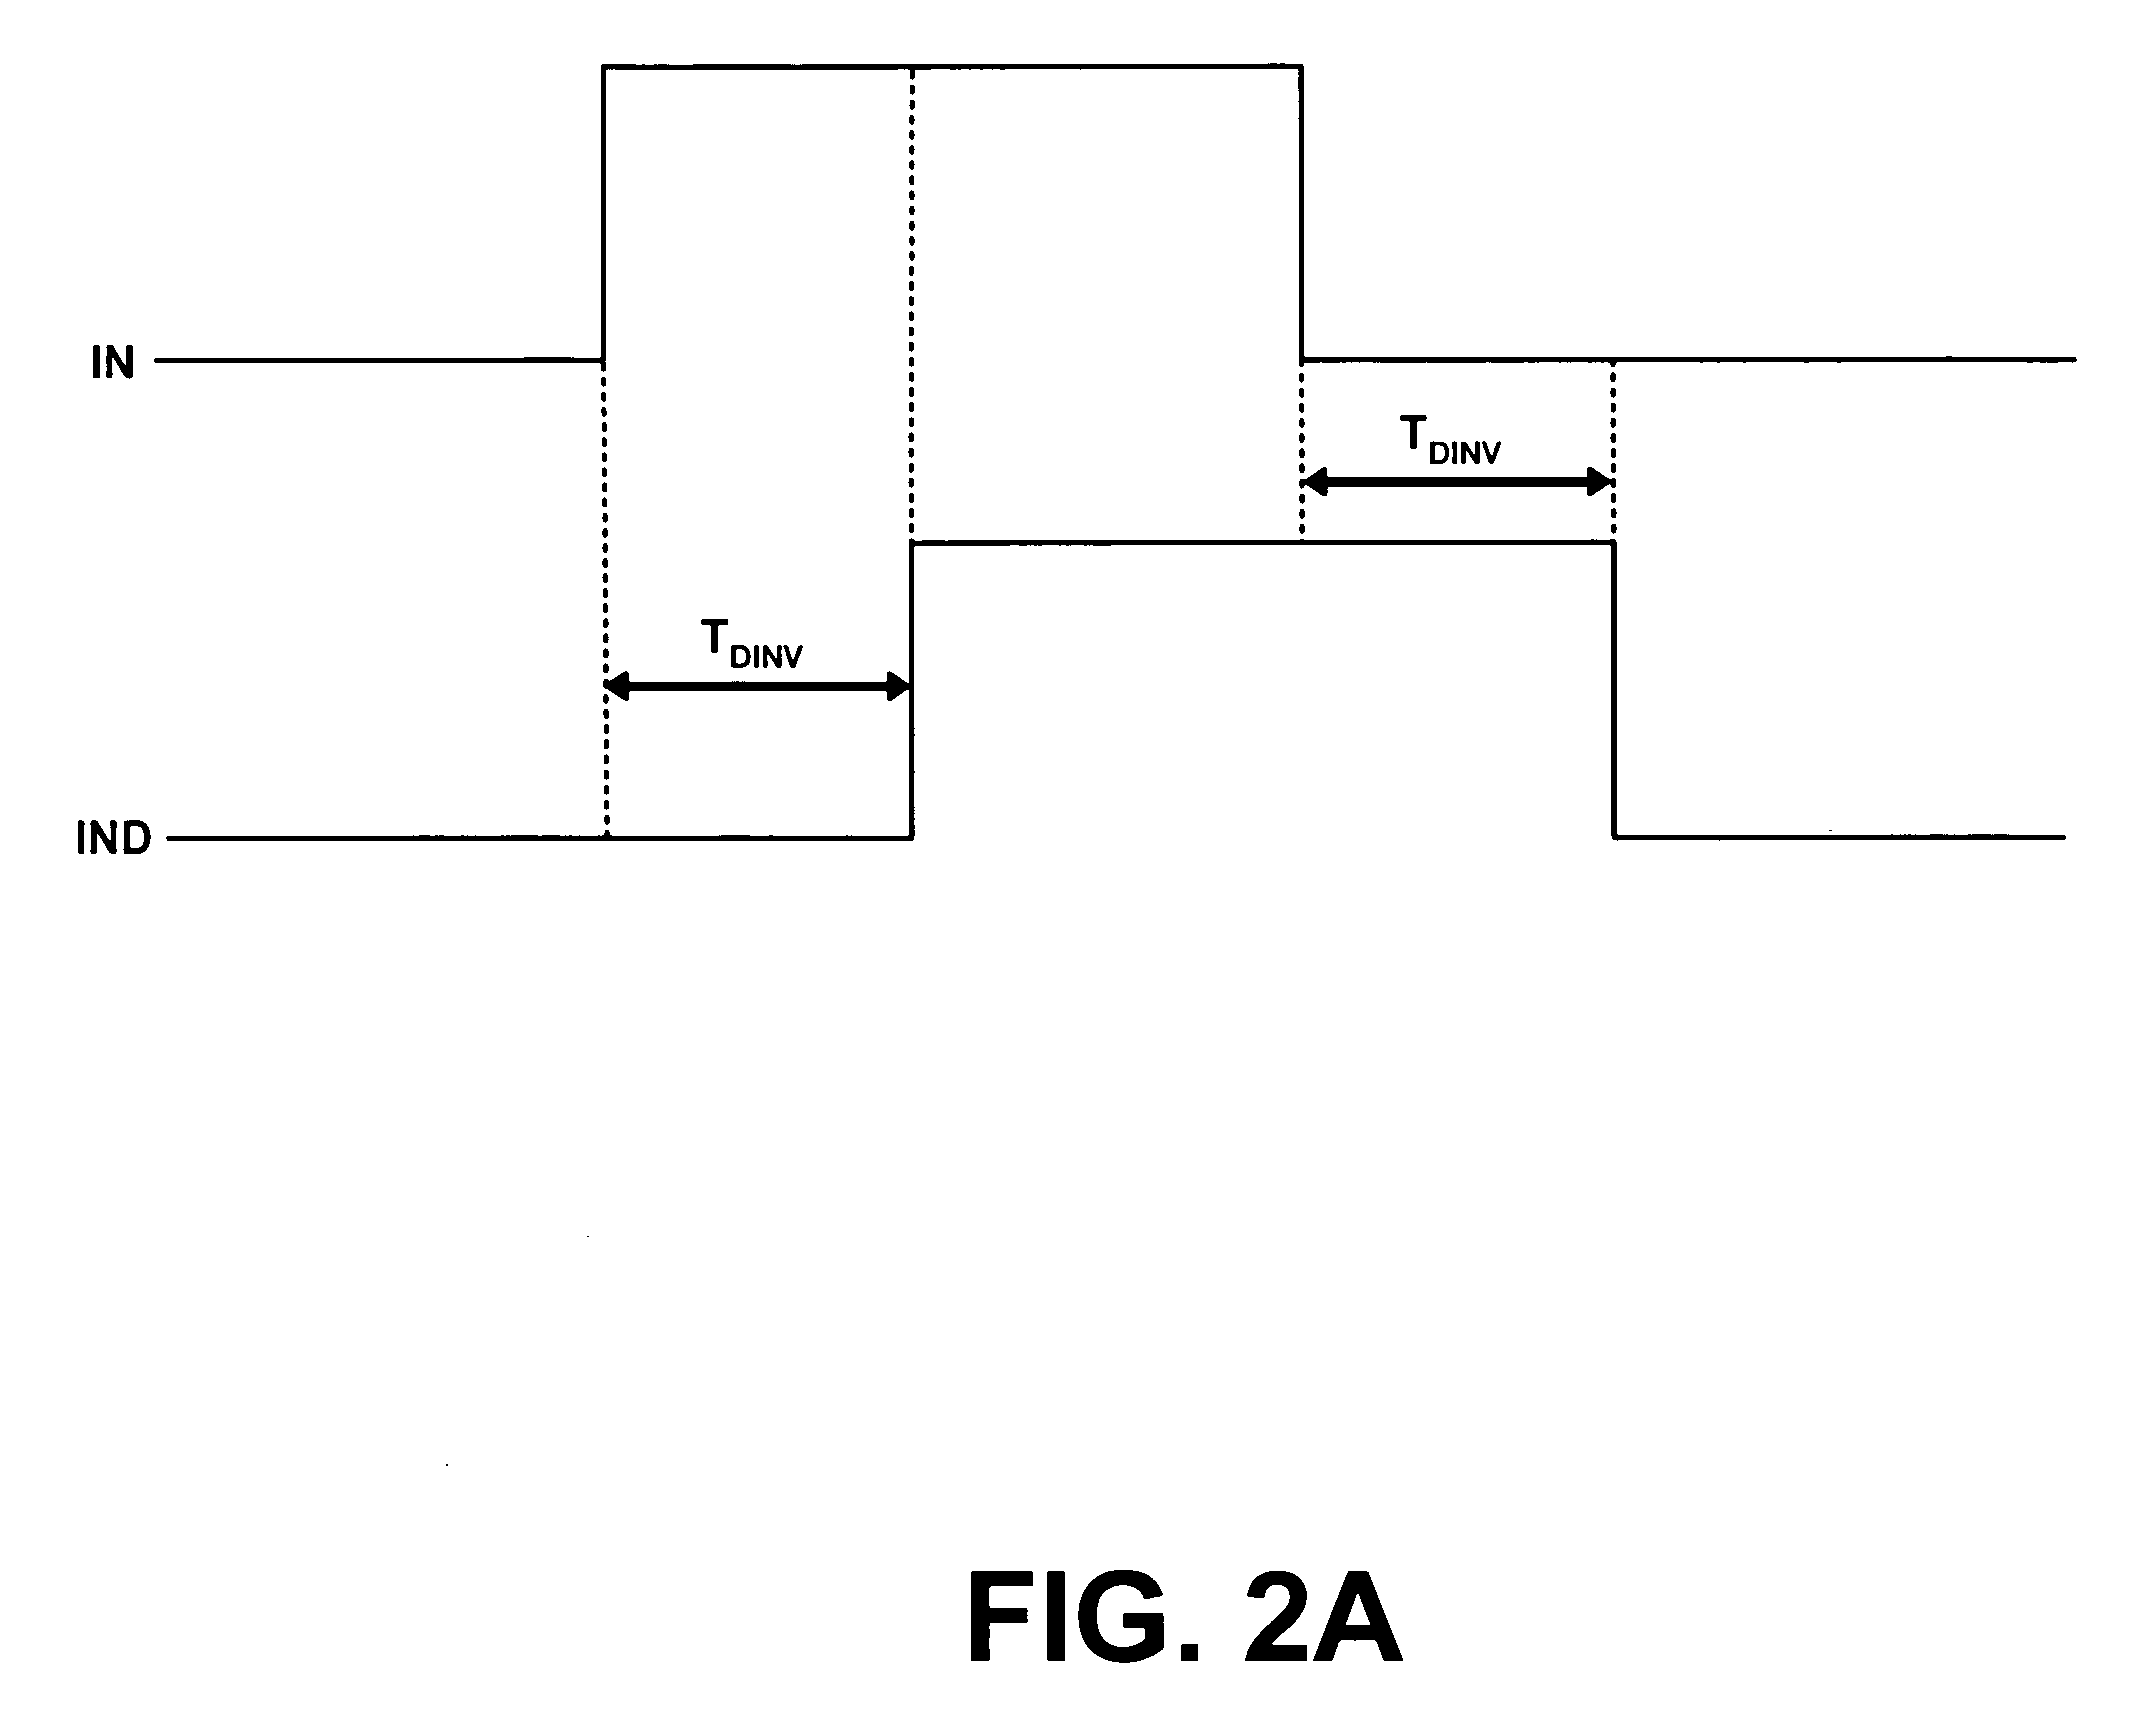 Pulse-rejecting circuit for suppressing single-event transients